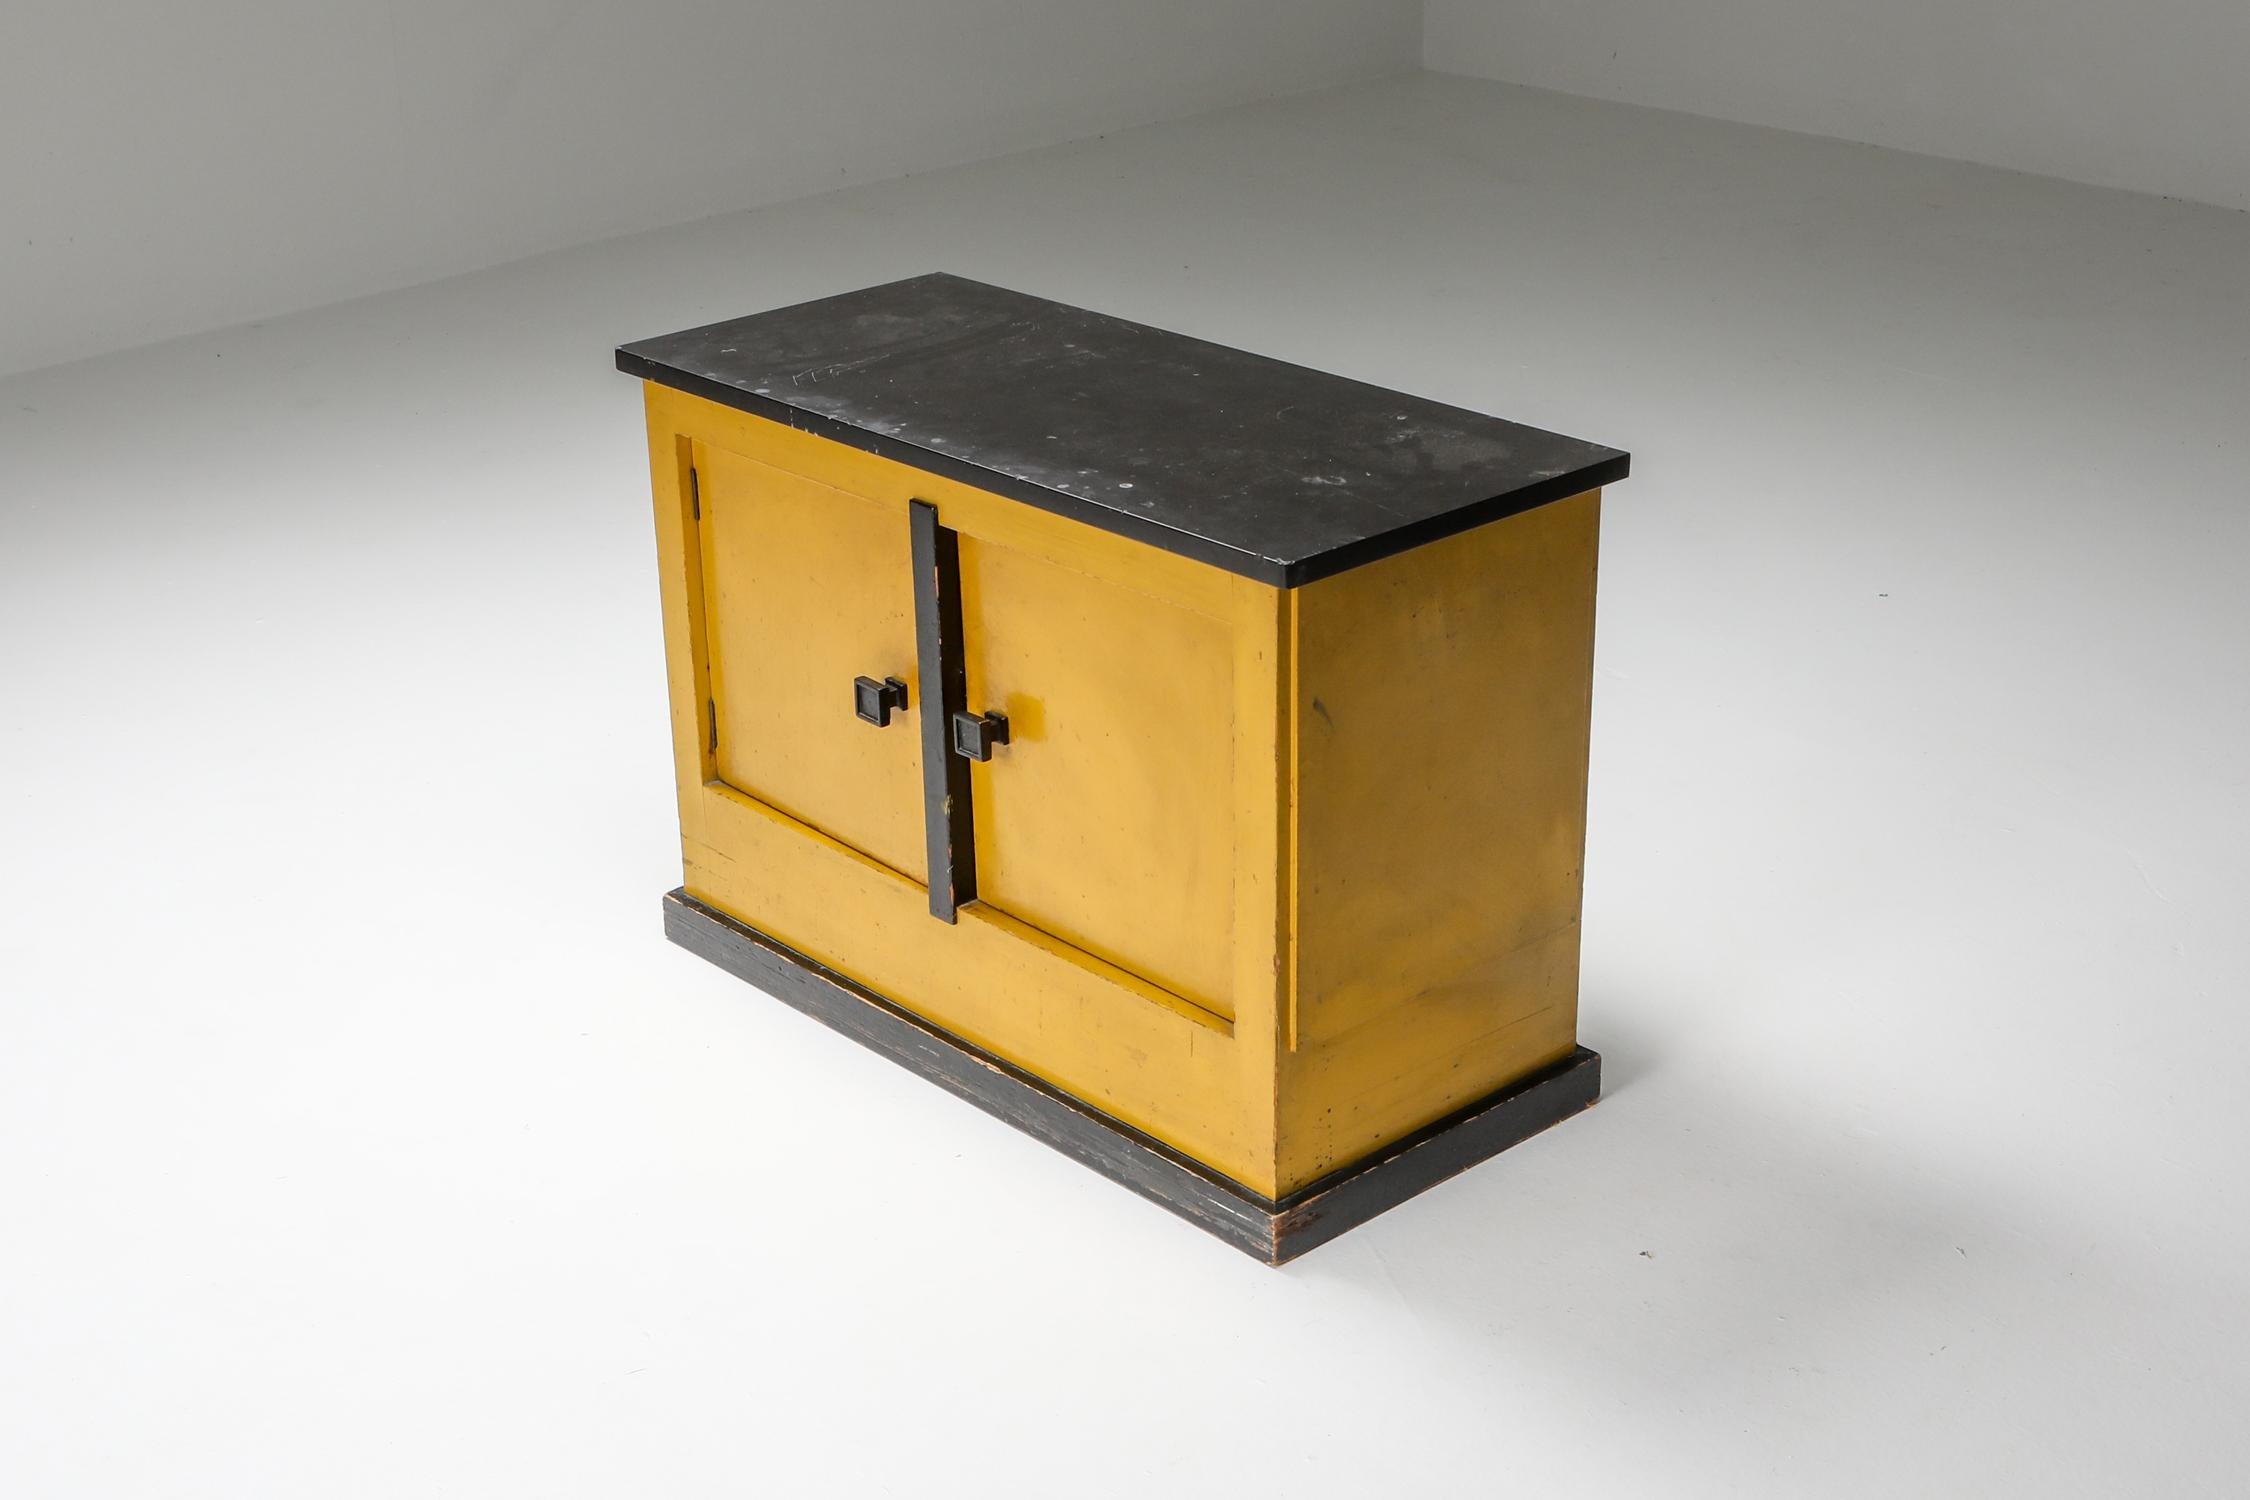 Early 20th Century Dry bar Cabinet by Dutch Modernist H.Wouda 1924